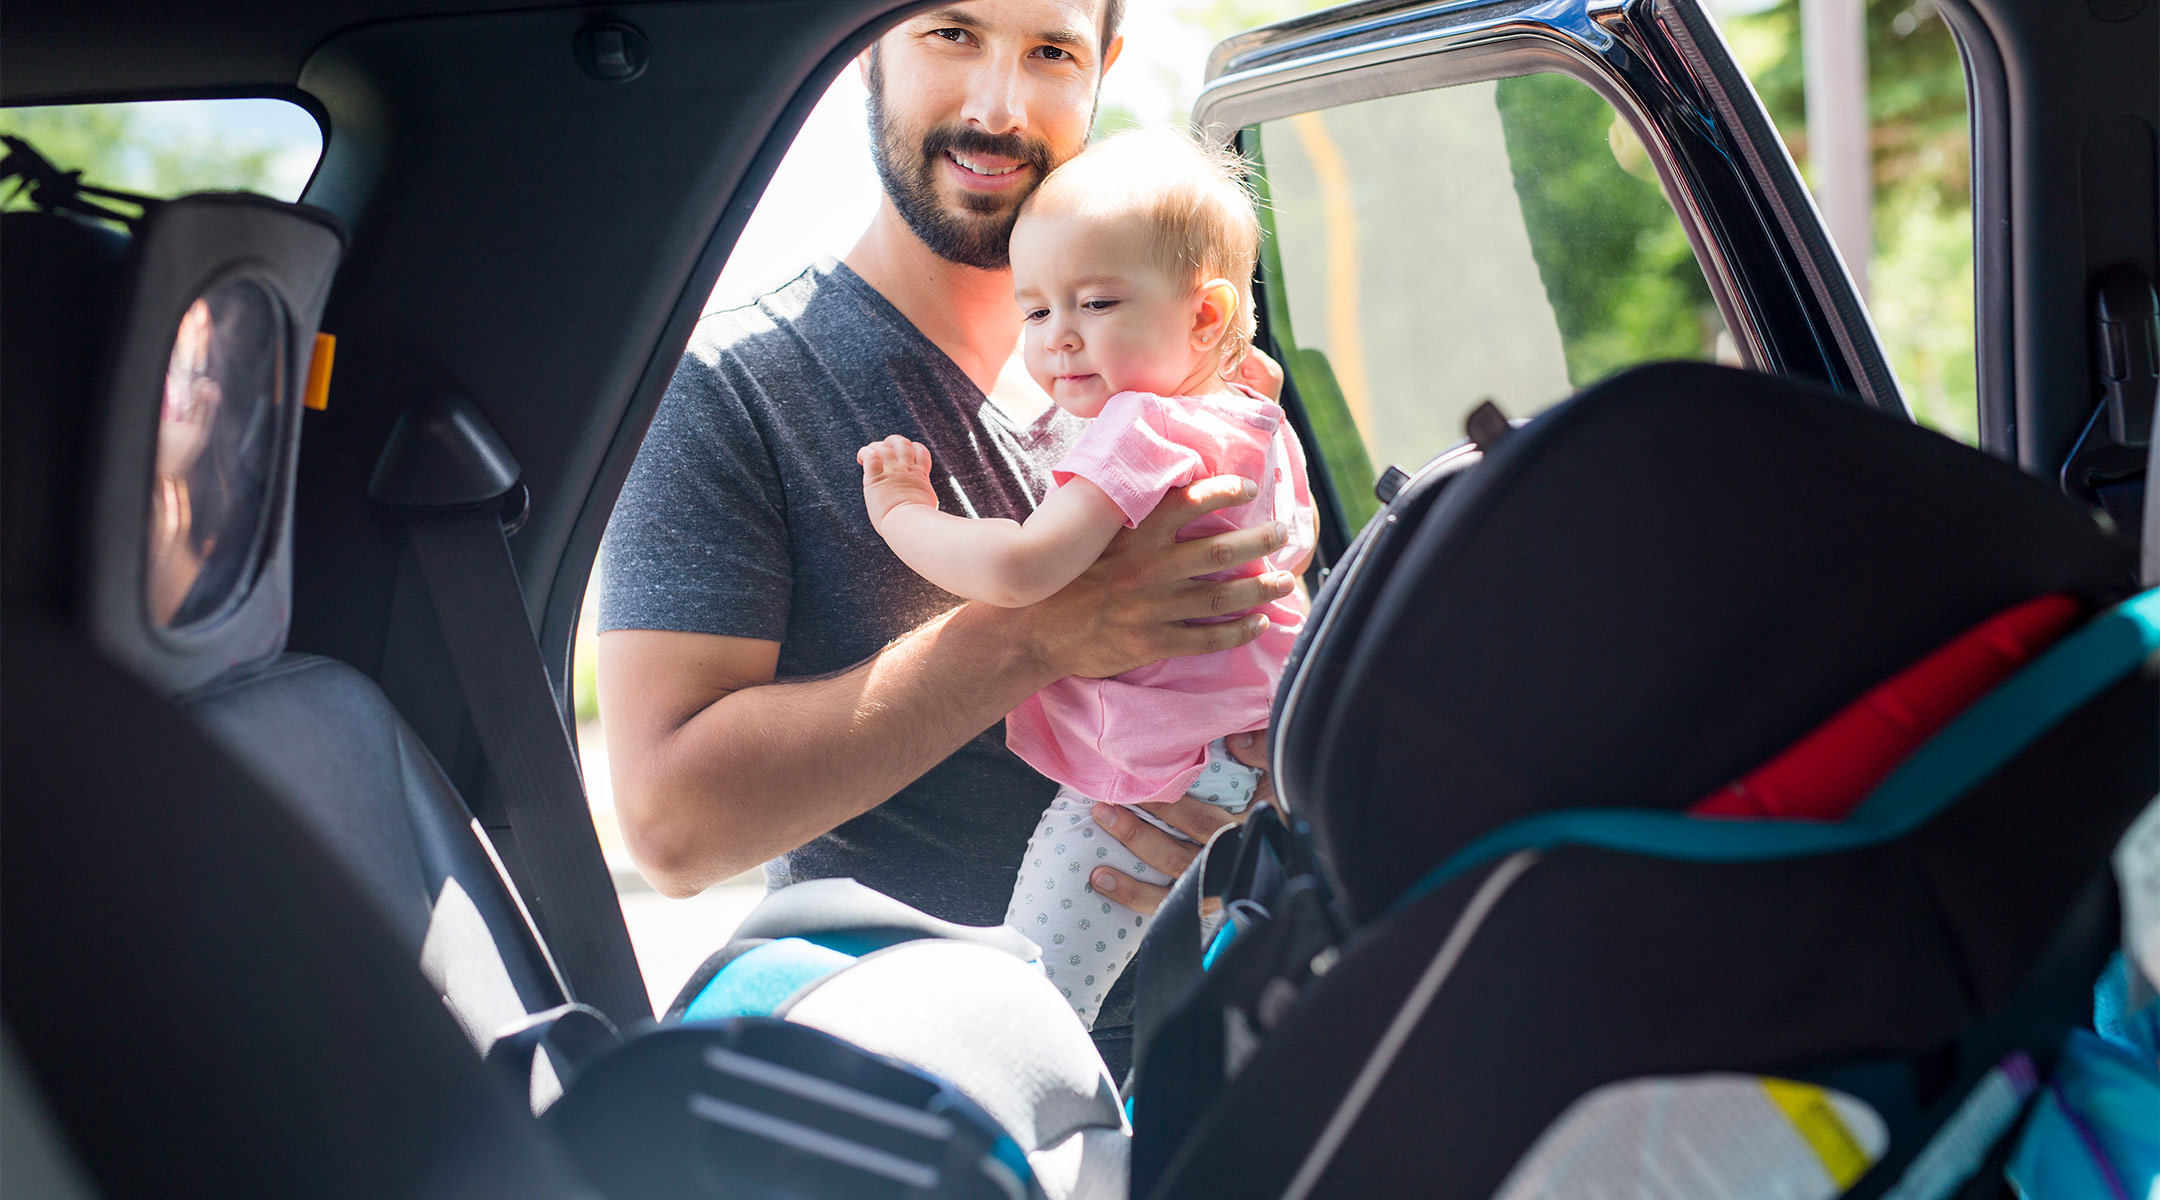 dad safely straps baby into car seat preventing injury from a crash